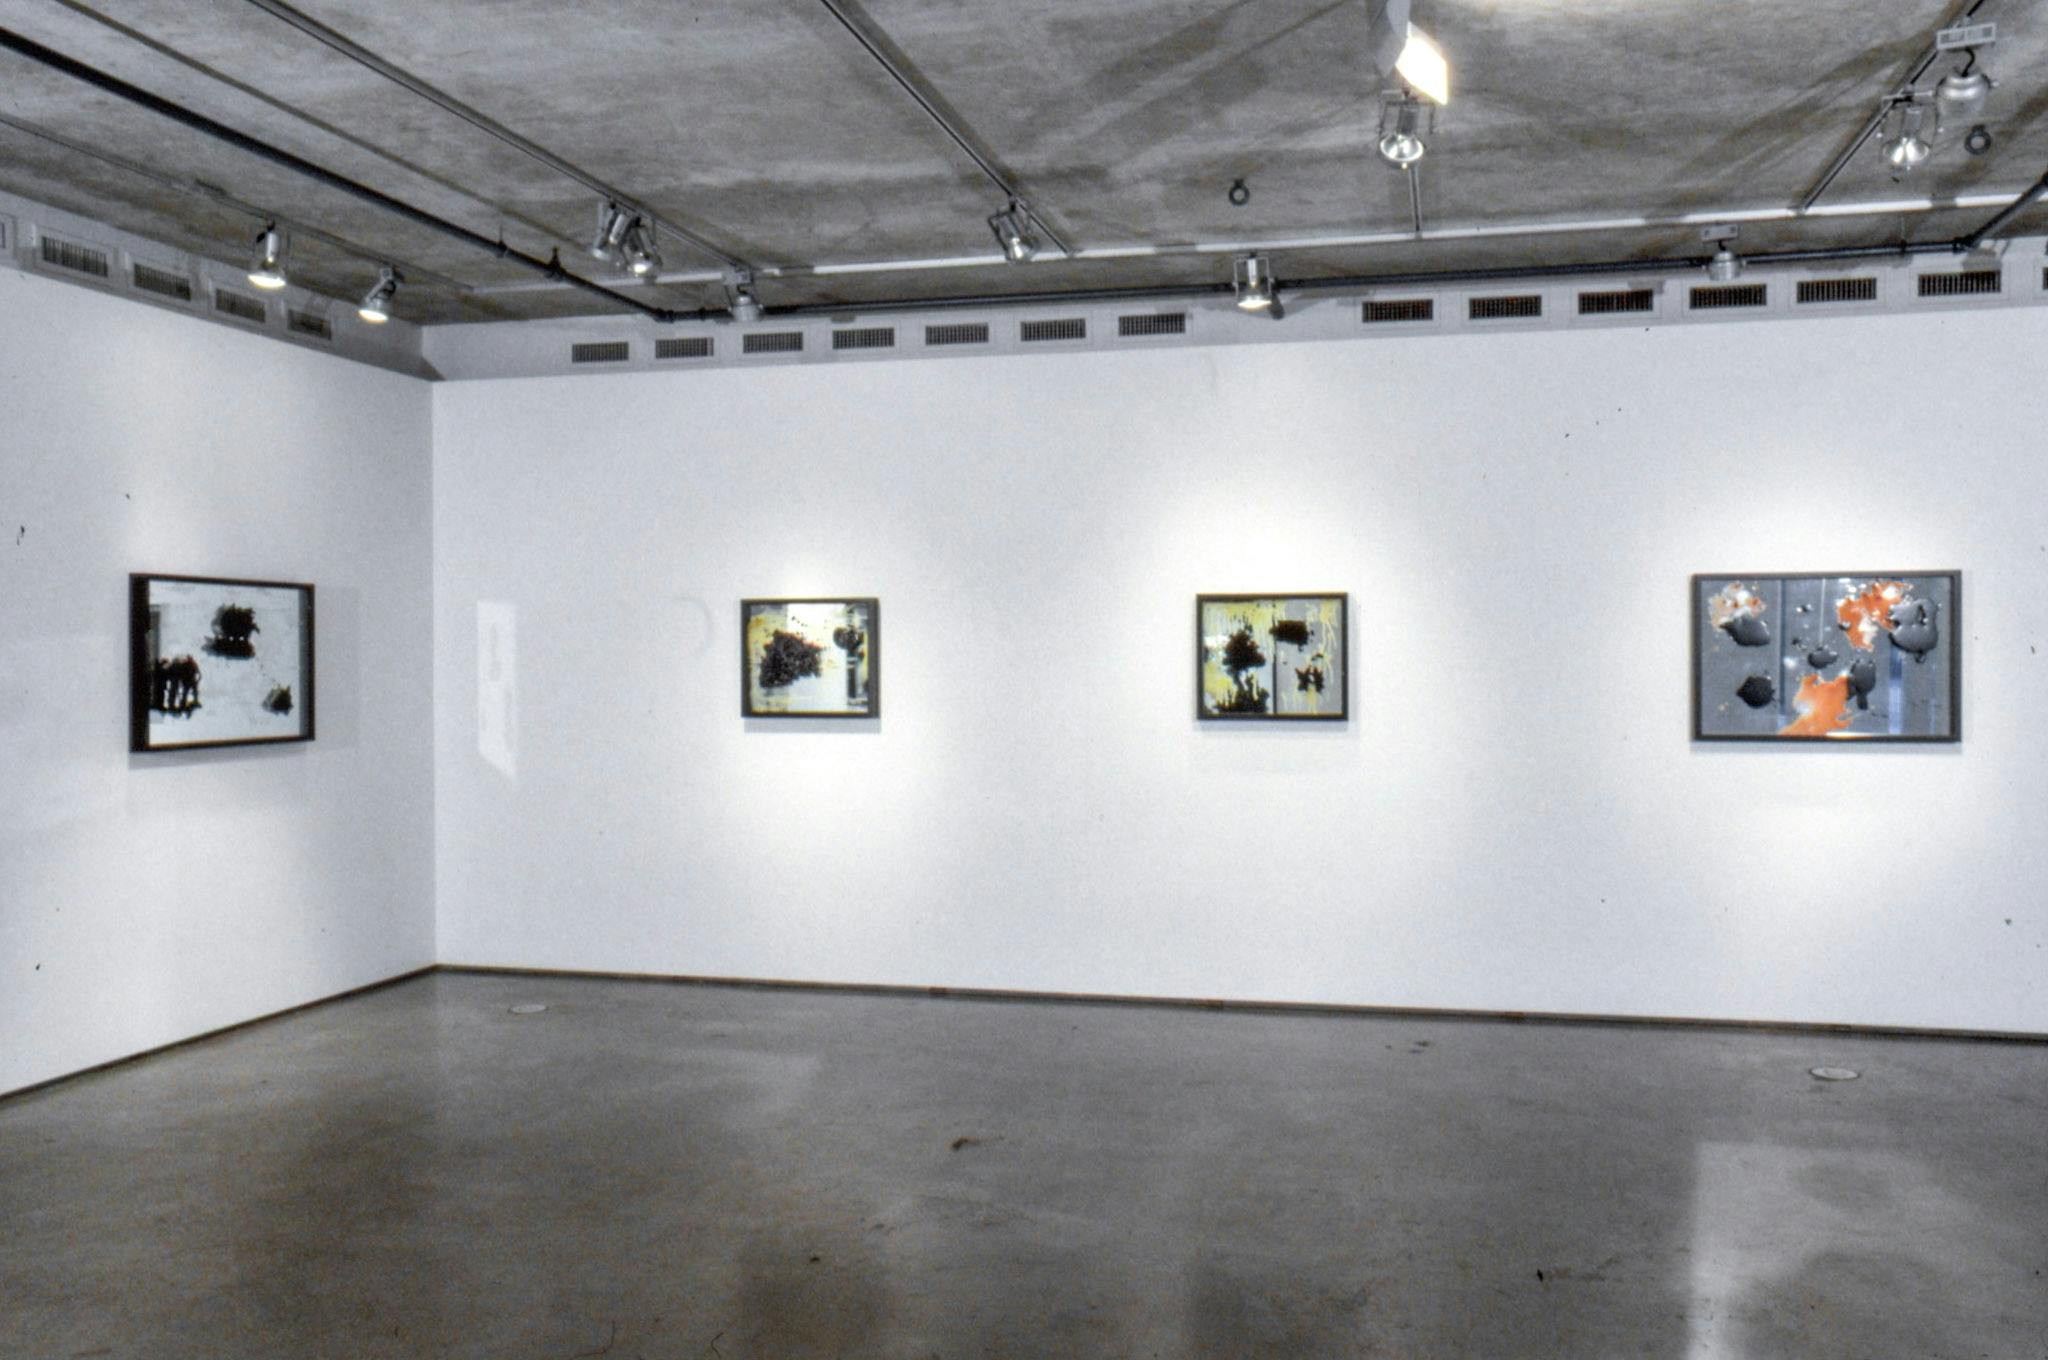 Installation image of Marina Roy’s paintings. Paintings of abstract shapes are made on the mirrors. Three paintings are mounted on the far wall and a larger painting on the left wall. 